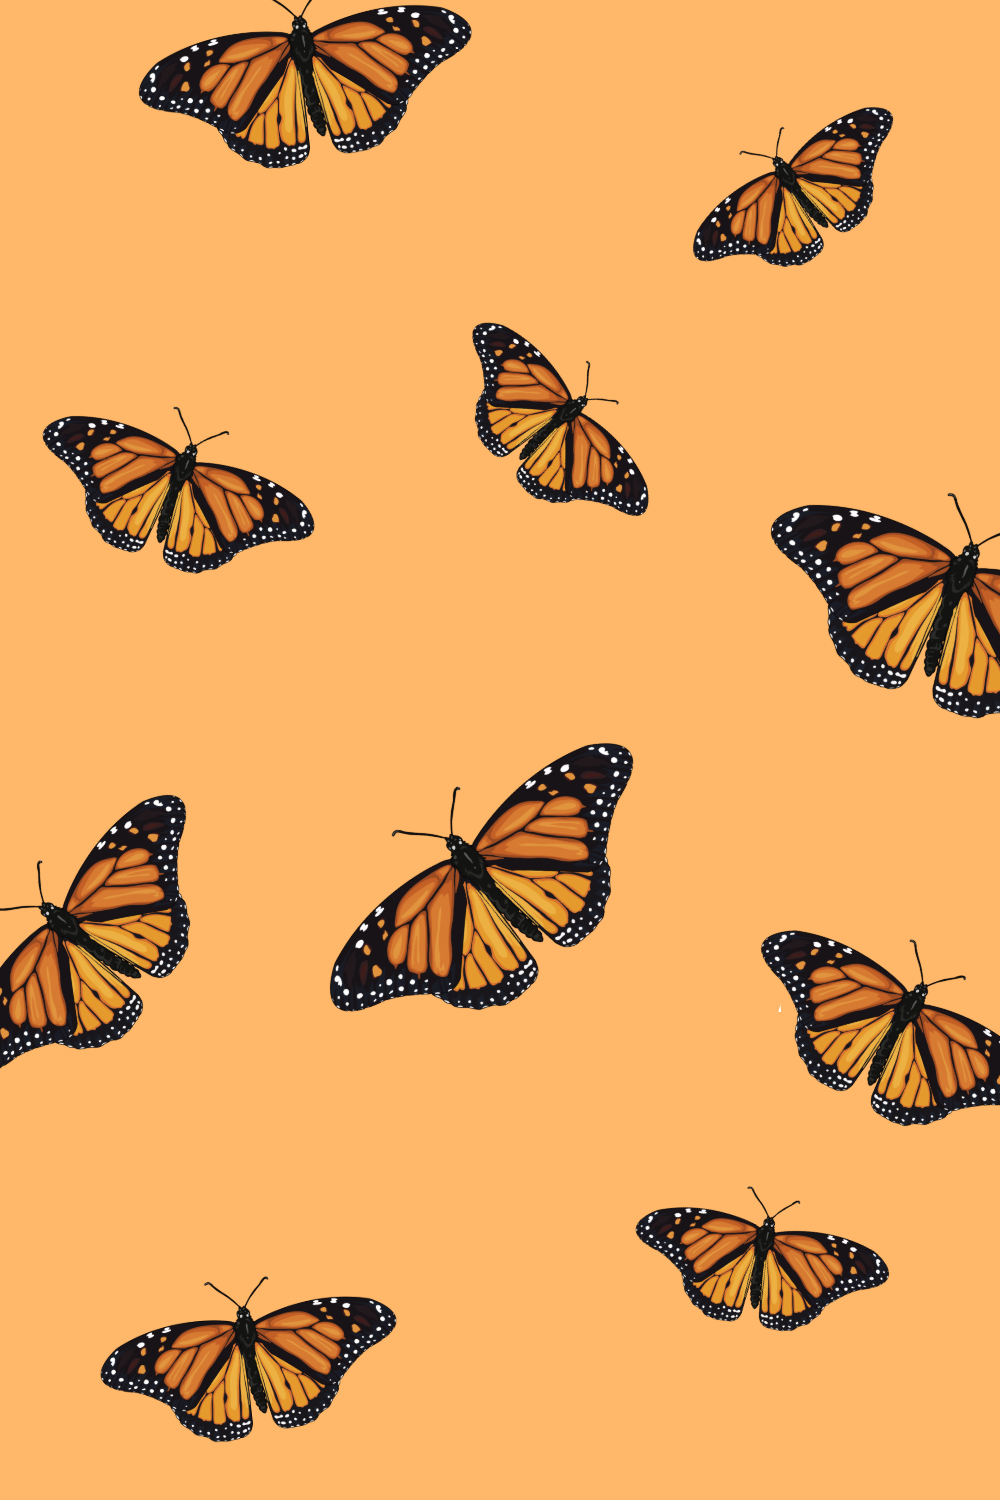 Aesthetic Tumblr Monarch Butterfly iPhone Wallpaper